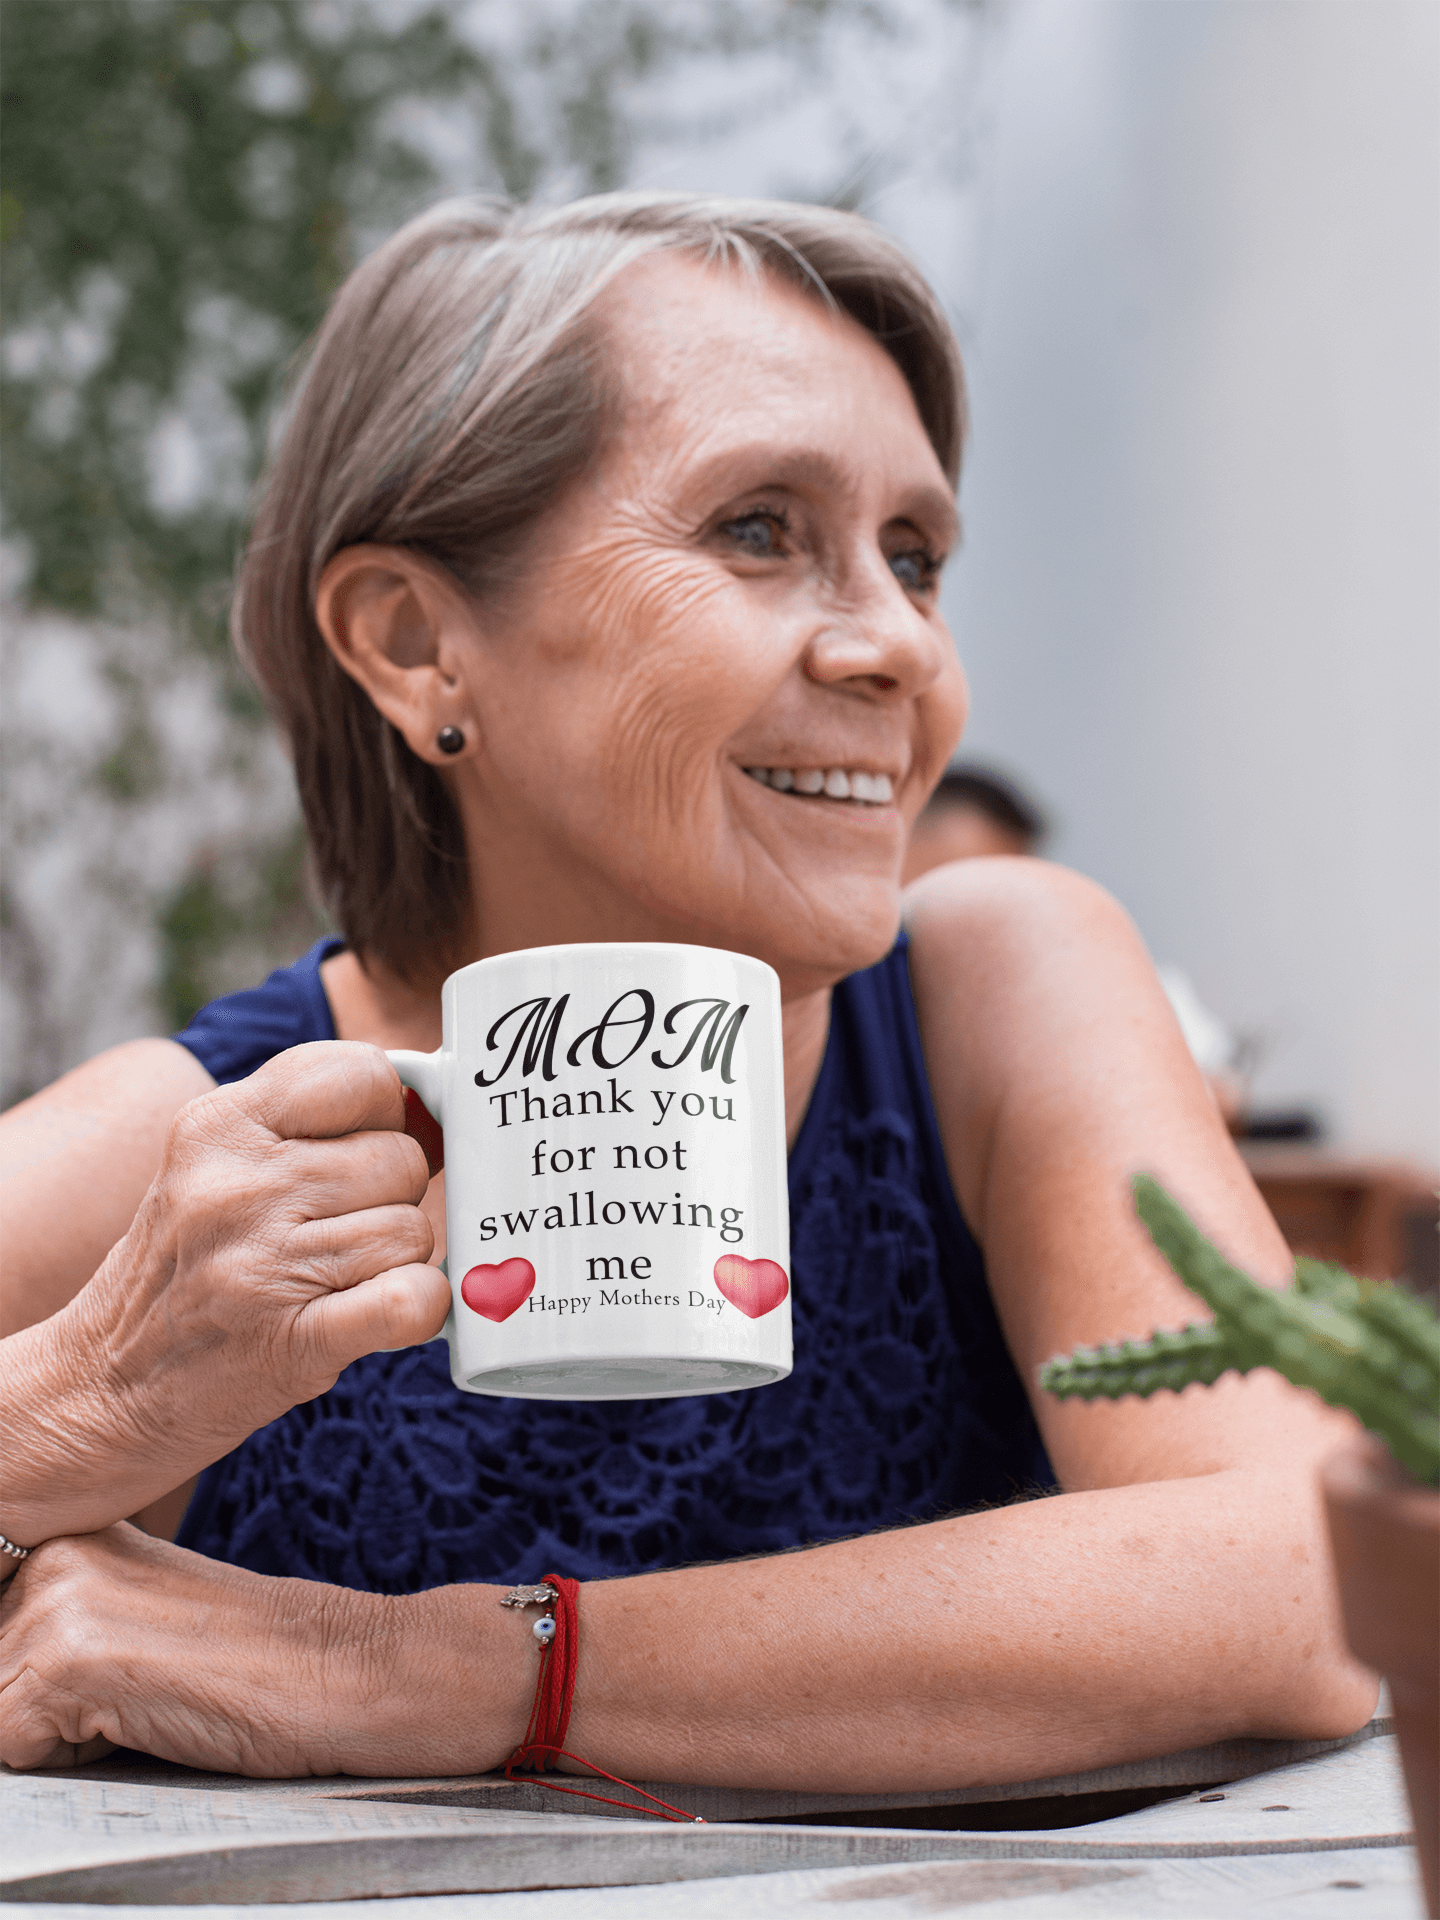 Mom, thank you for not swallowing me - Happy Mothers day - White glossy mug